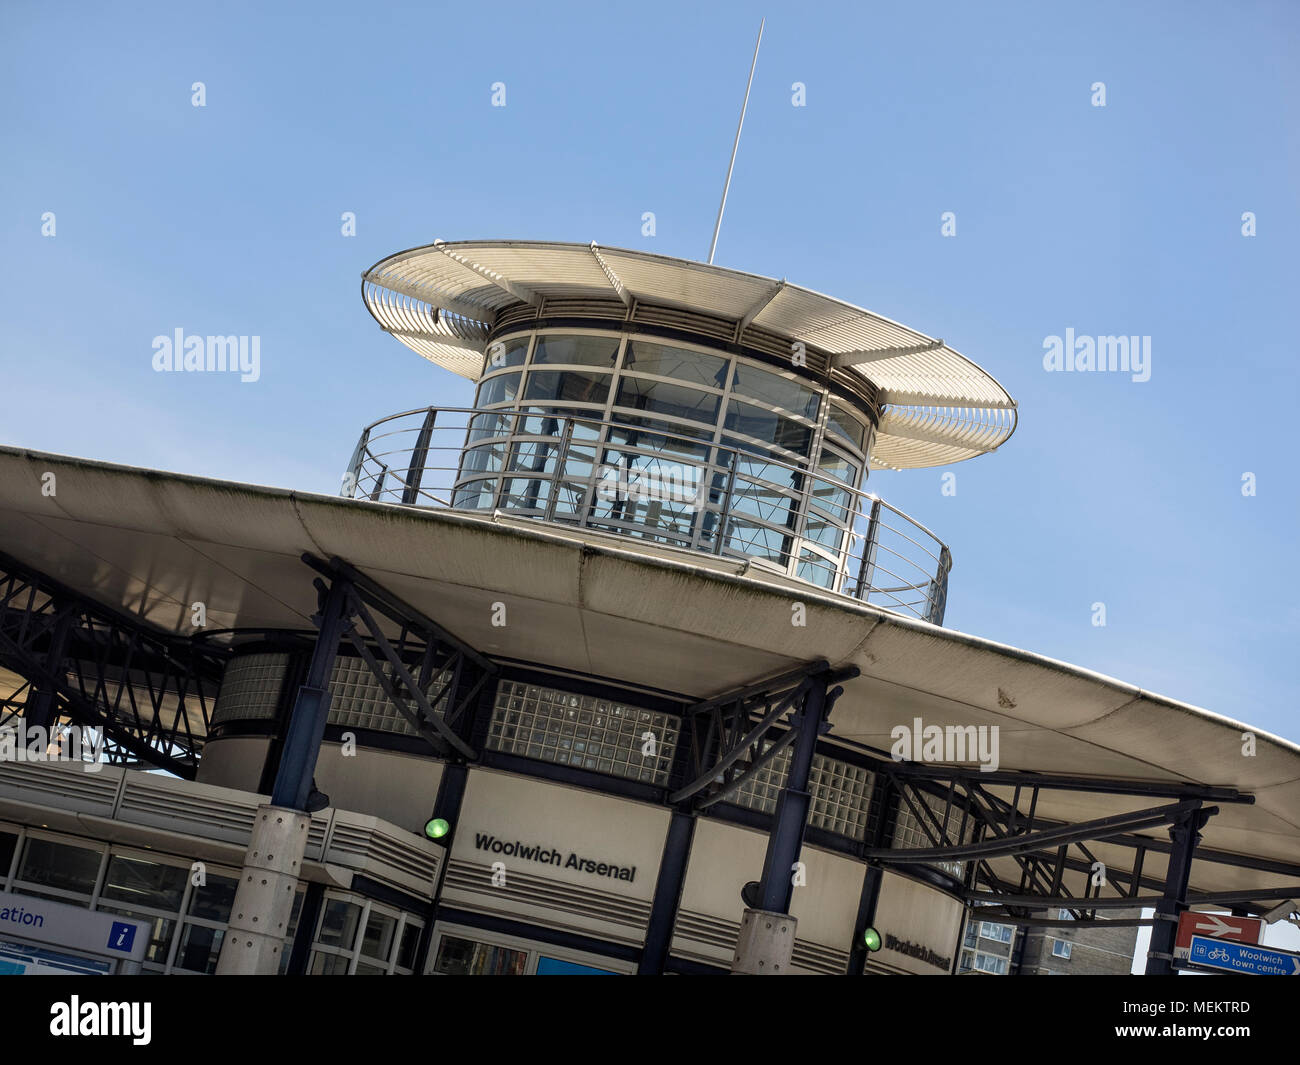 WOOLWICH, LONDON: - APRIL 05, 2018:   Detail of Woolwich Arsenal Railway Station Stock Photo